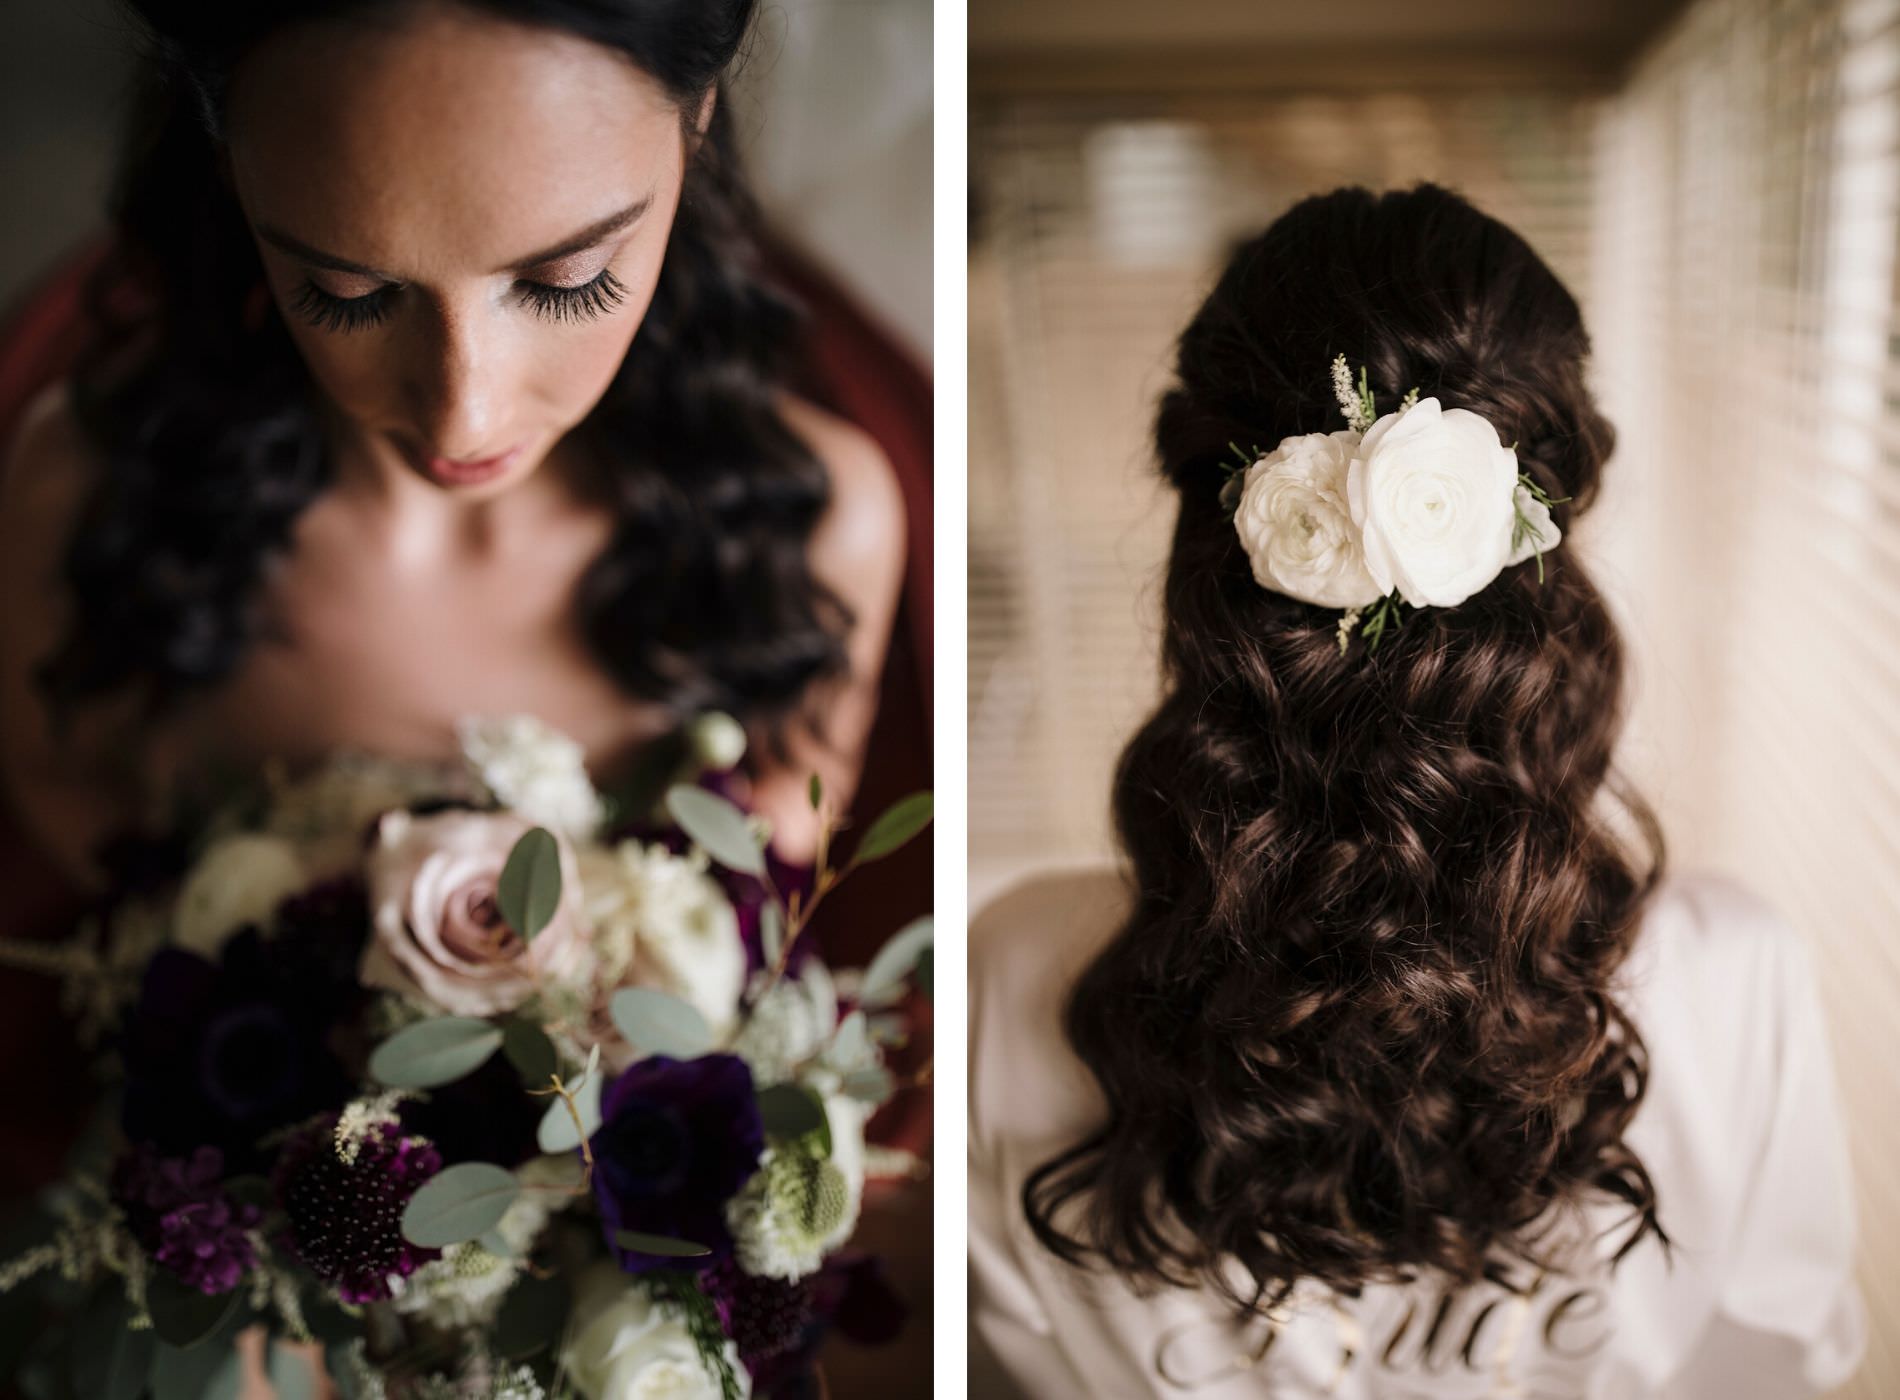 Curly Hair Bride Bridal Hairstyle Natural Curls with Fresh Flowers | Bridal Bouquet with Deep Maroon Burgundy Purple Ranunculus and Blush Roses and Ivory Hydrangea with Seeded Eucalyptus